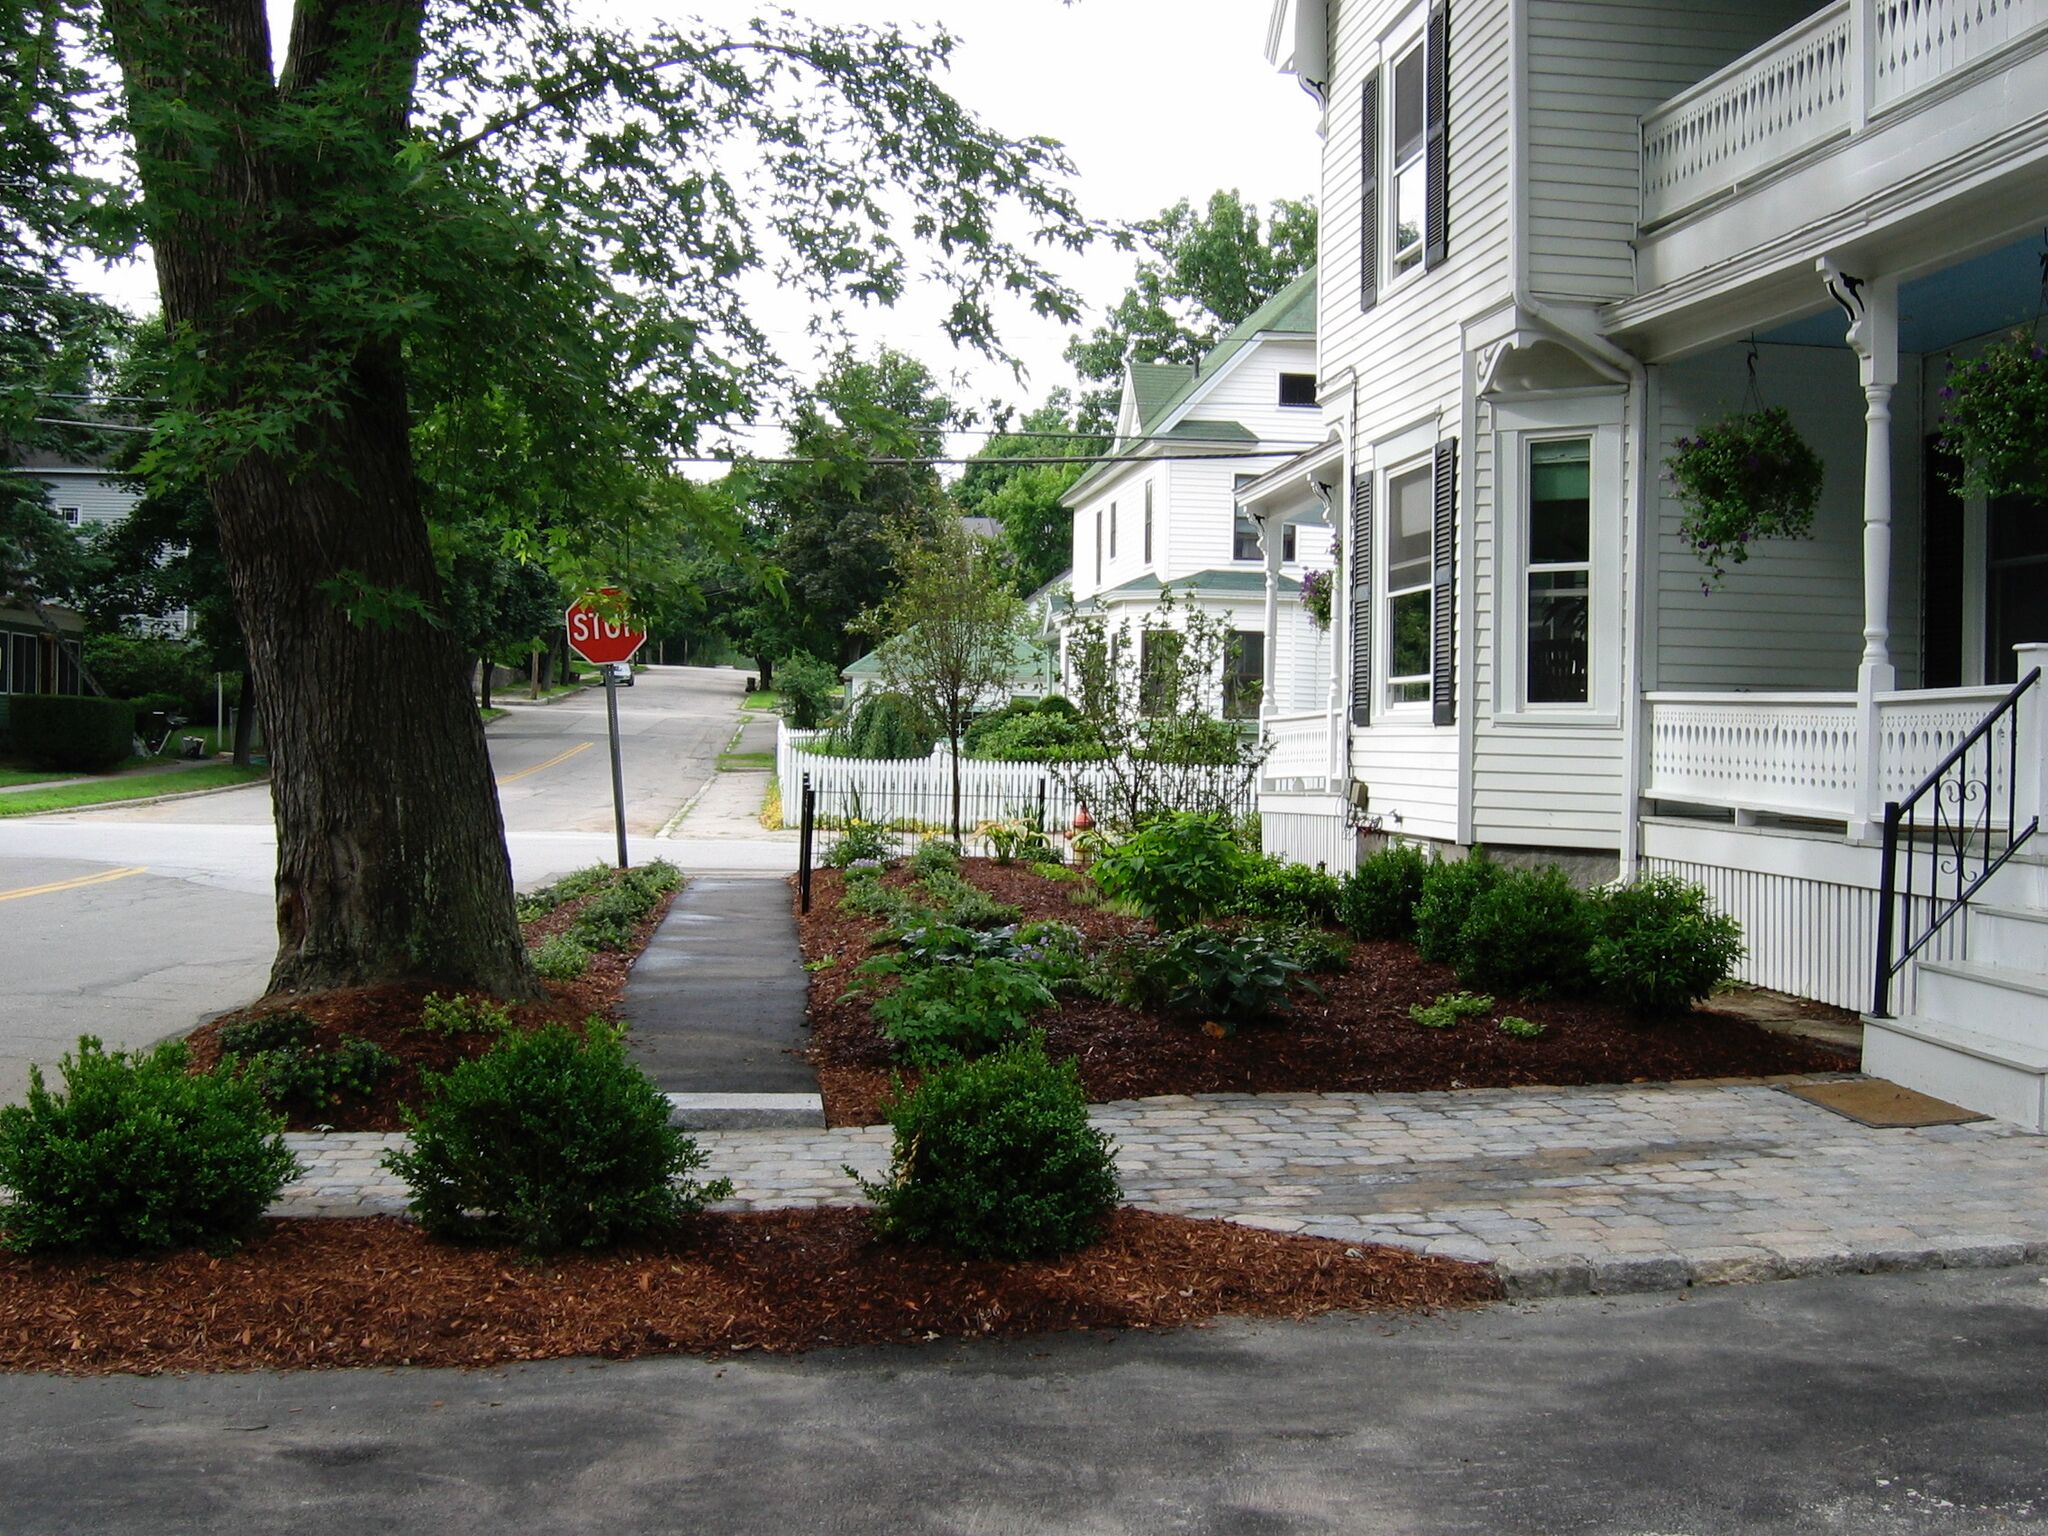 Urban Plant Bed and Cobblestone Walkway